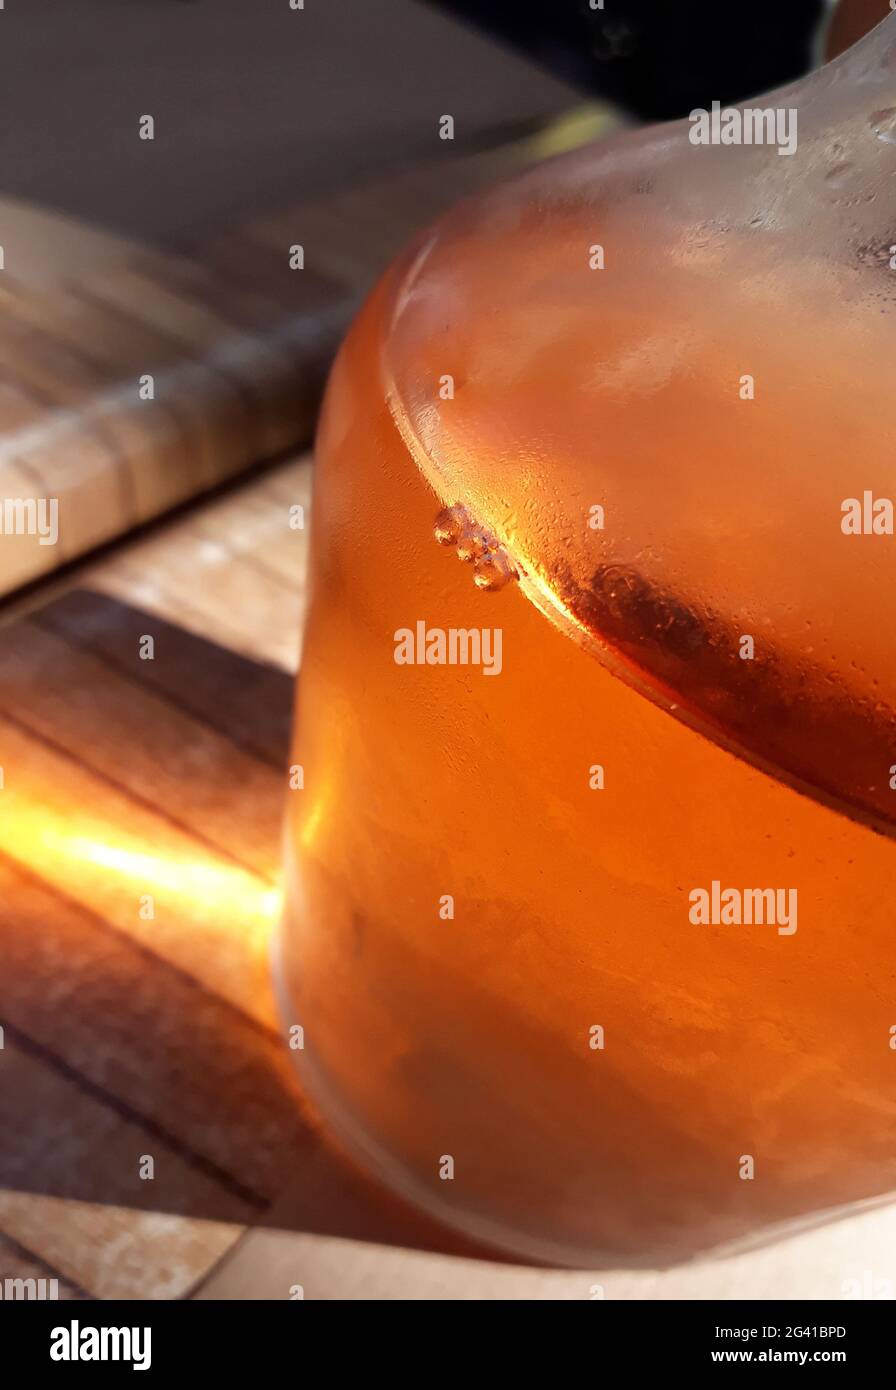 Carafe with wine on wooden table, detail Stock Photo